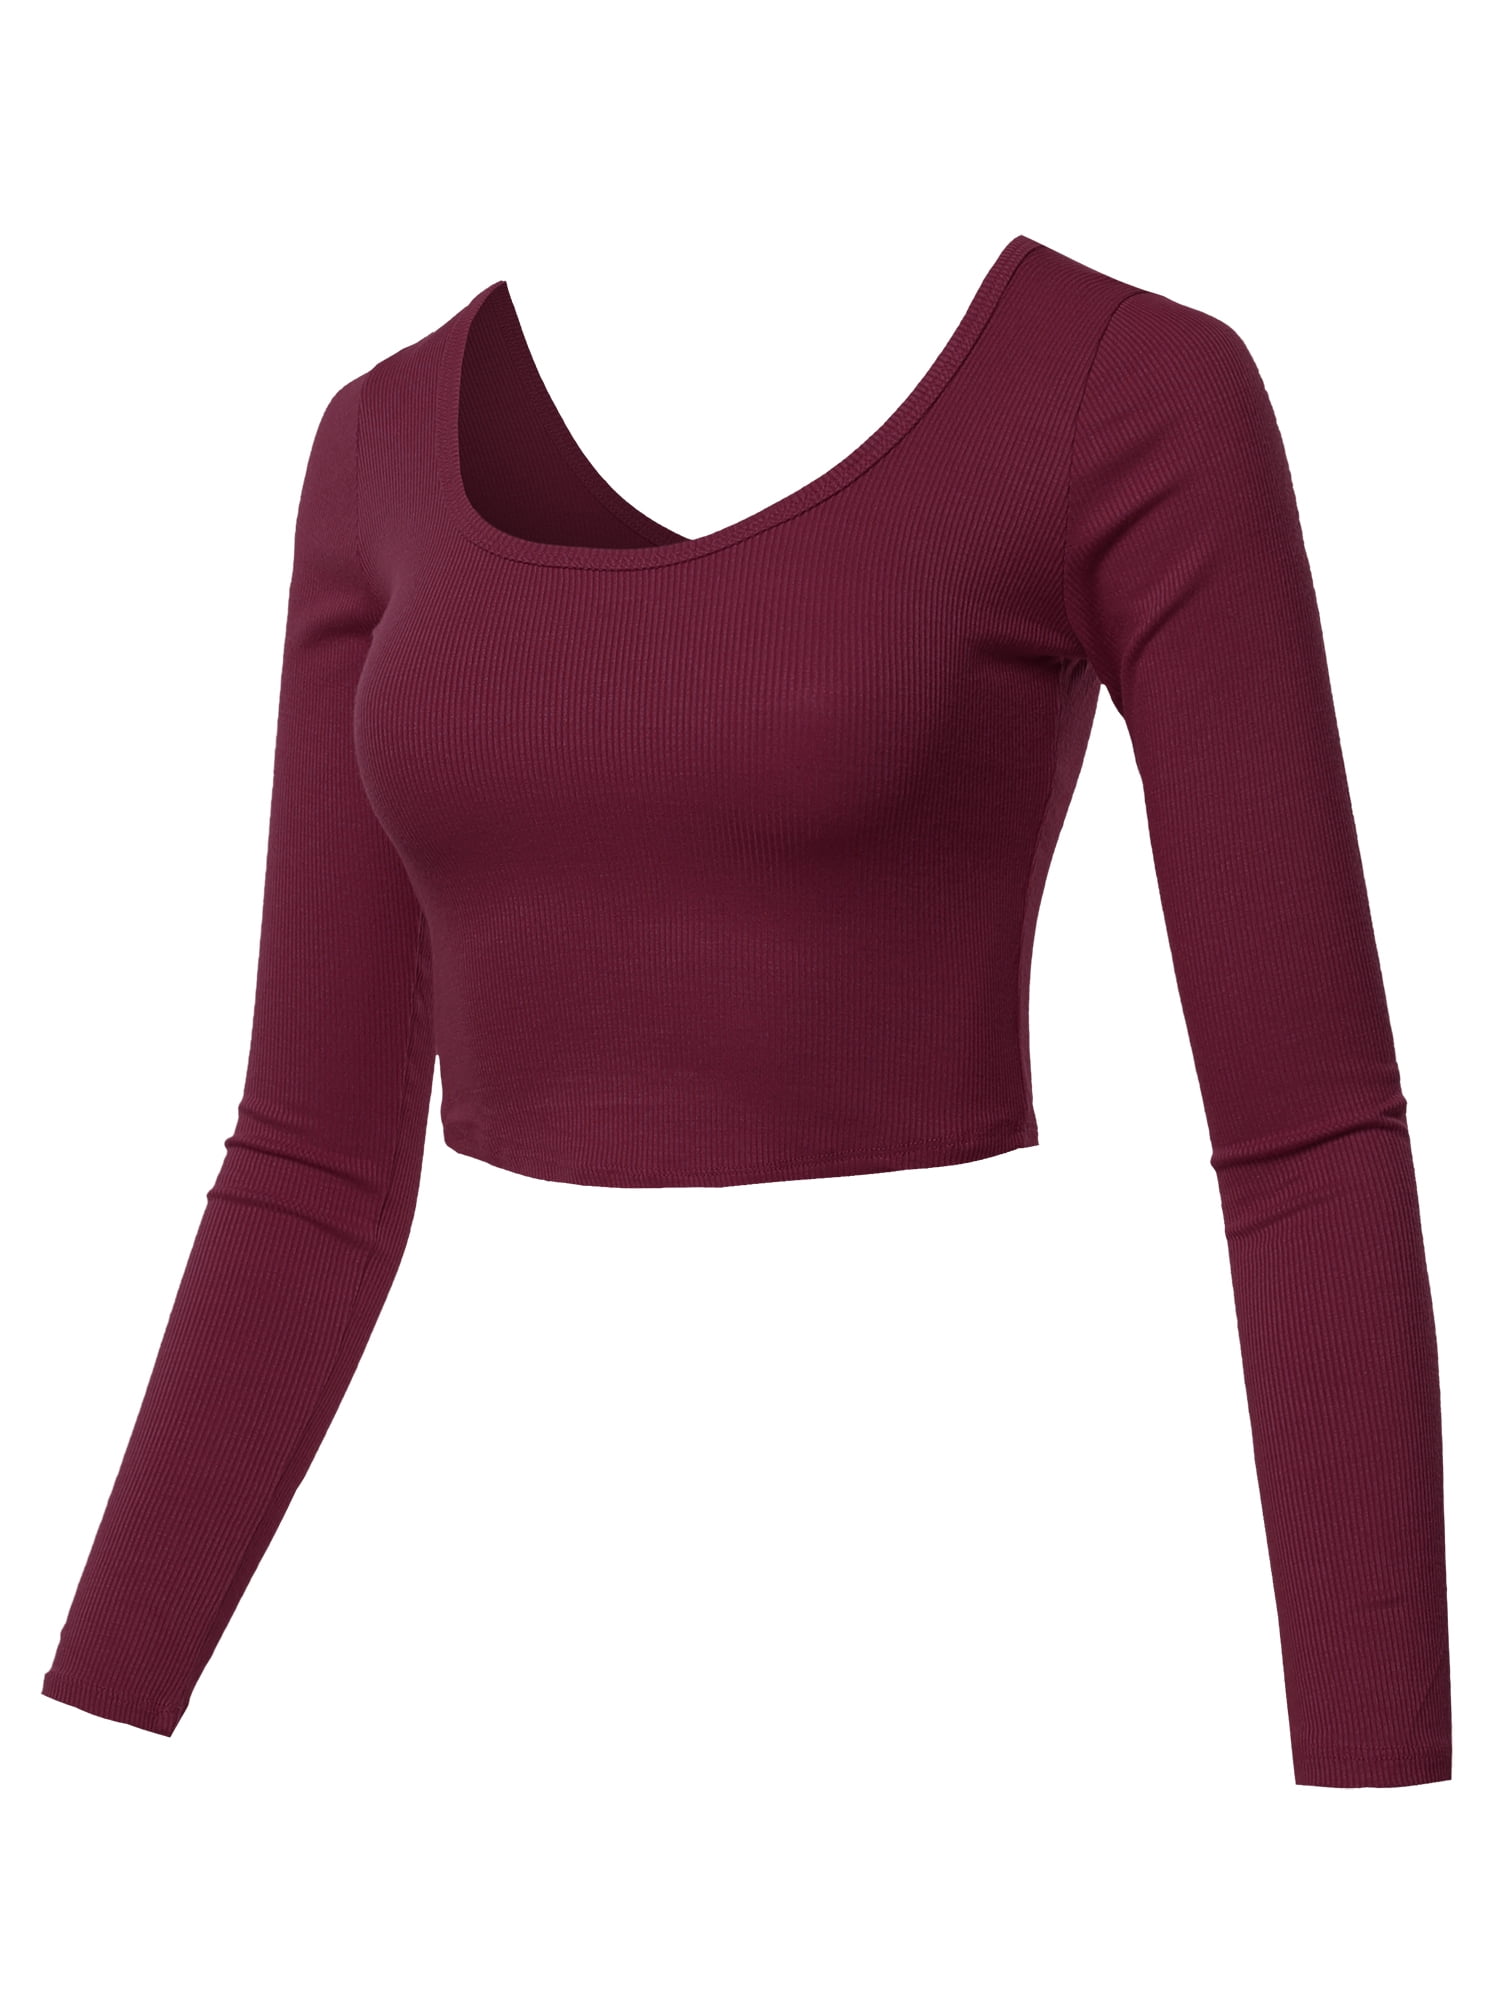 A2Y Women's Cropped Rib Lightweight Long Sleeve Double Scoop Neck Tops ...